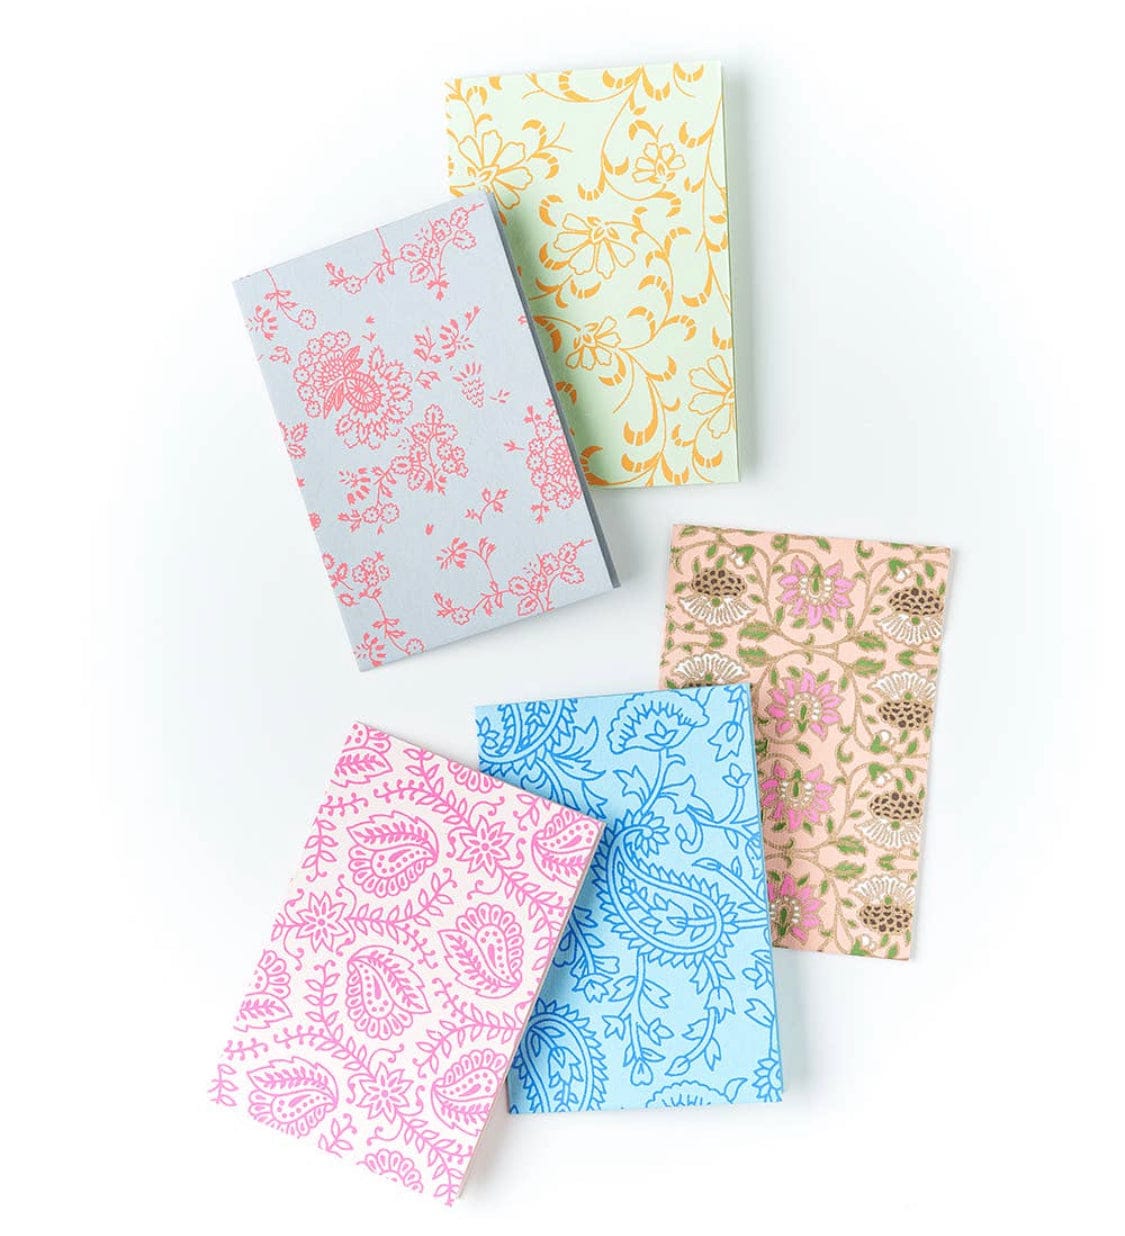 Eco-Friendly Note Cards Set of 8